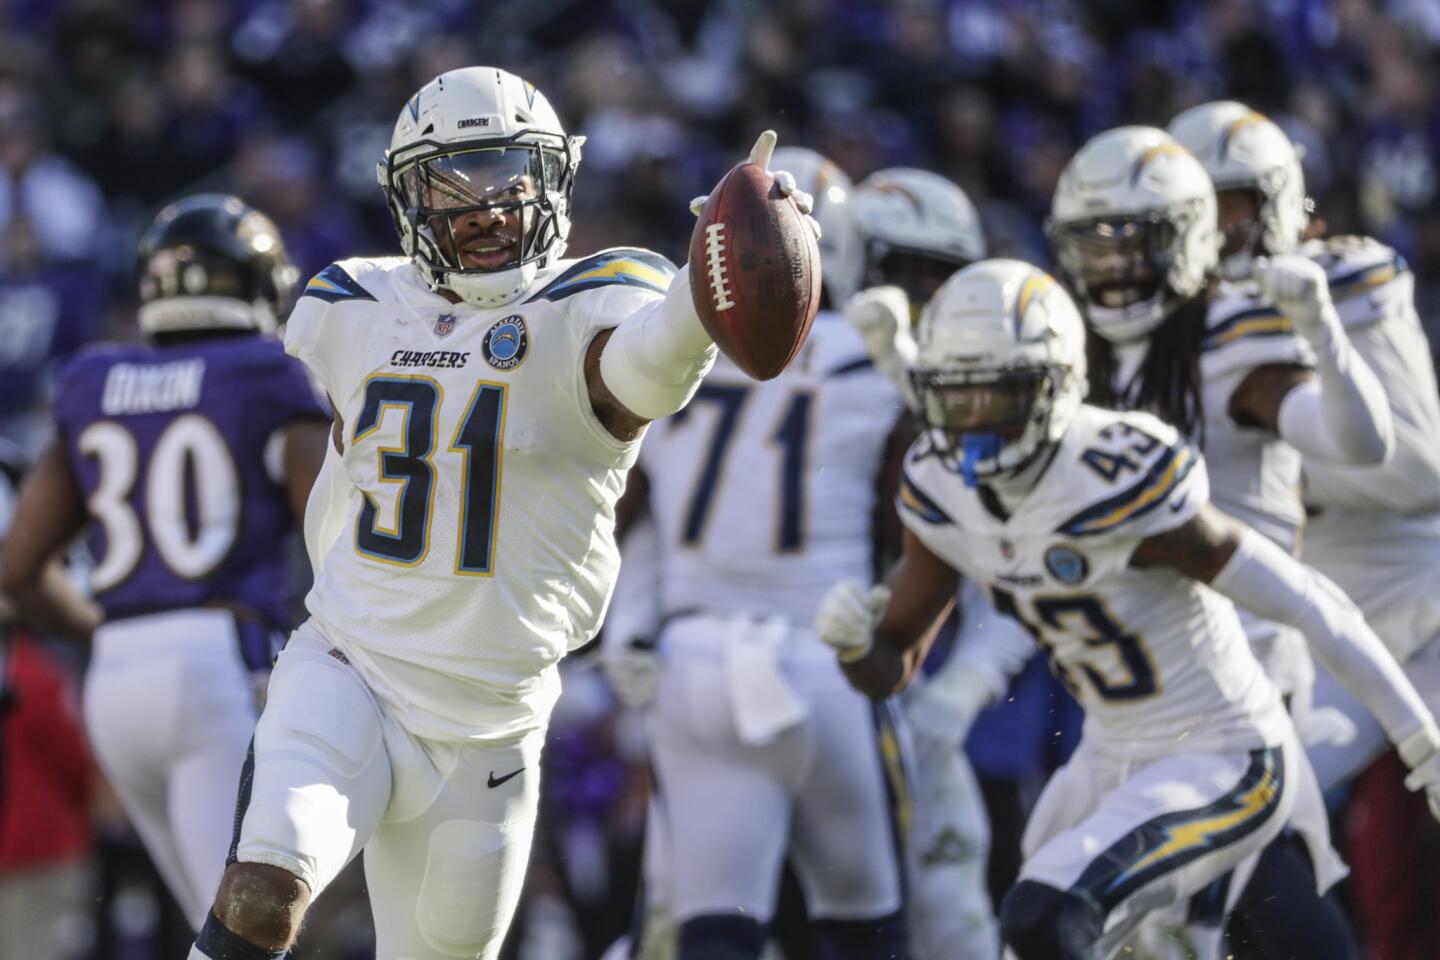 Chargers safety Adrian Phillips celebrates after intercepting a pass from Ravens quarterback Lamar Jackson during the first half.